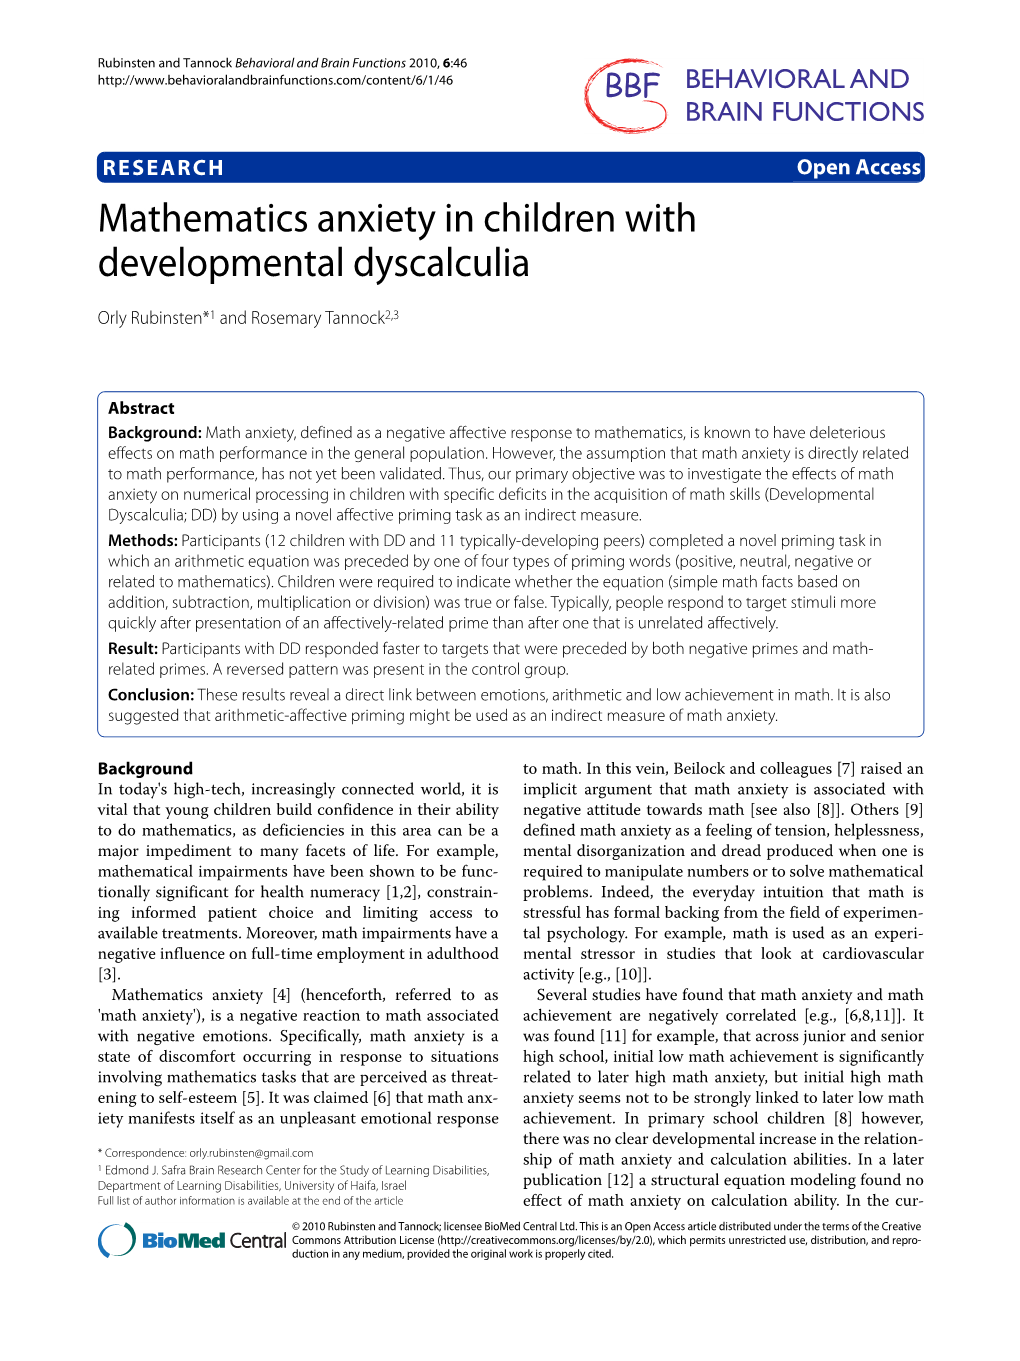 Mathematics Anxiety in Children with Developmental Dyscalculia Behavioral and Brain Functions 2010, 6:46